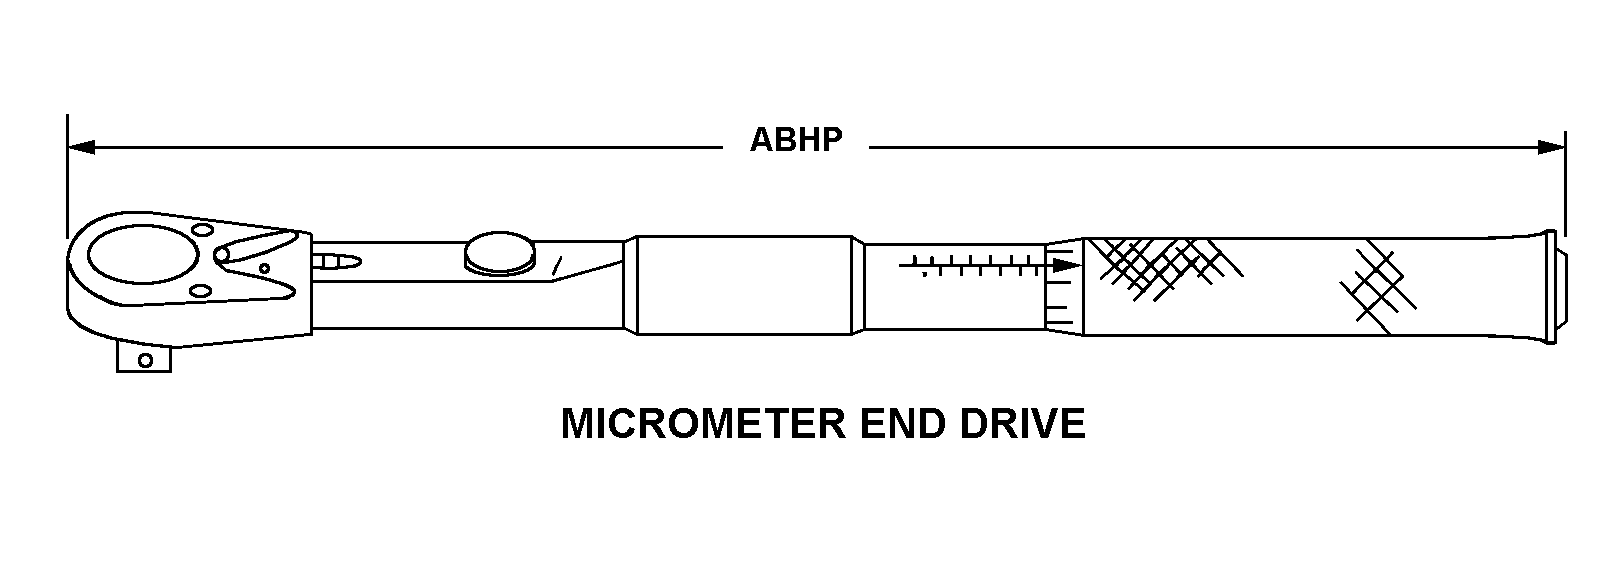 MICROMETER END DRIVE style nsn 5120-01-496-8949